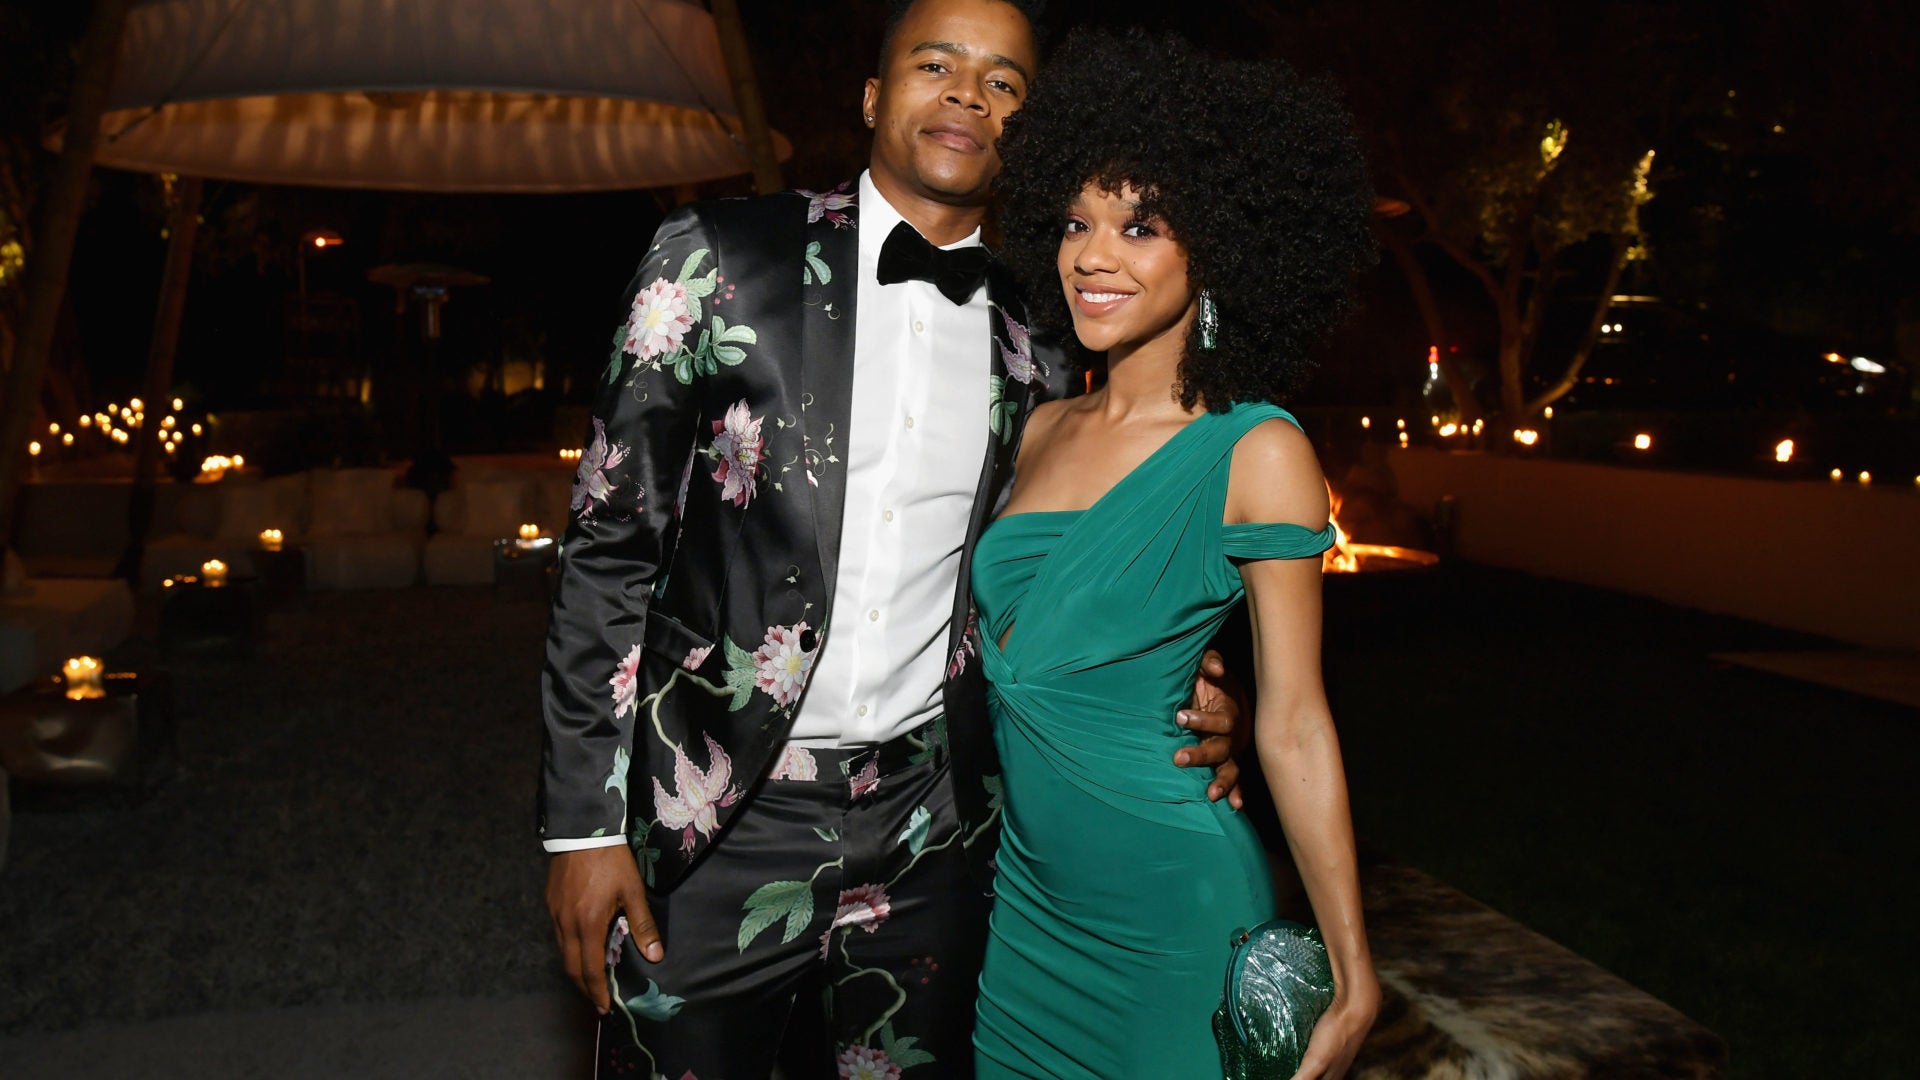 The Chi Star Tiffany Boone And Her Fiance Dear White People Star Marque Richardson Have The Sweetest Bond Essence